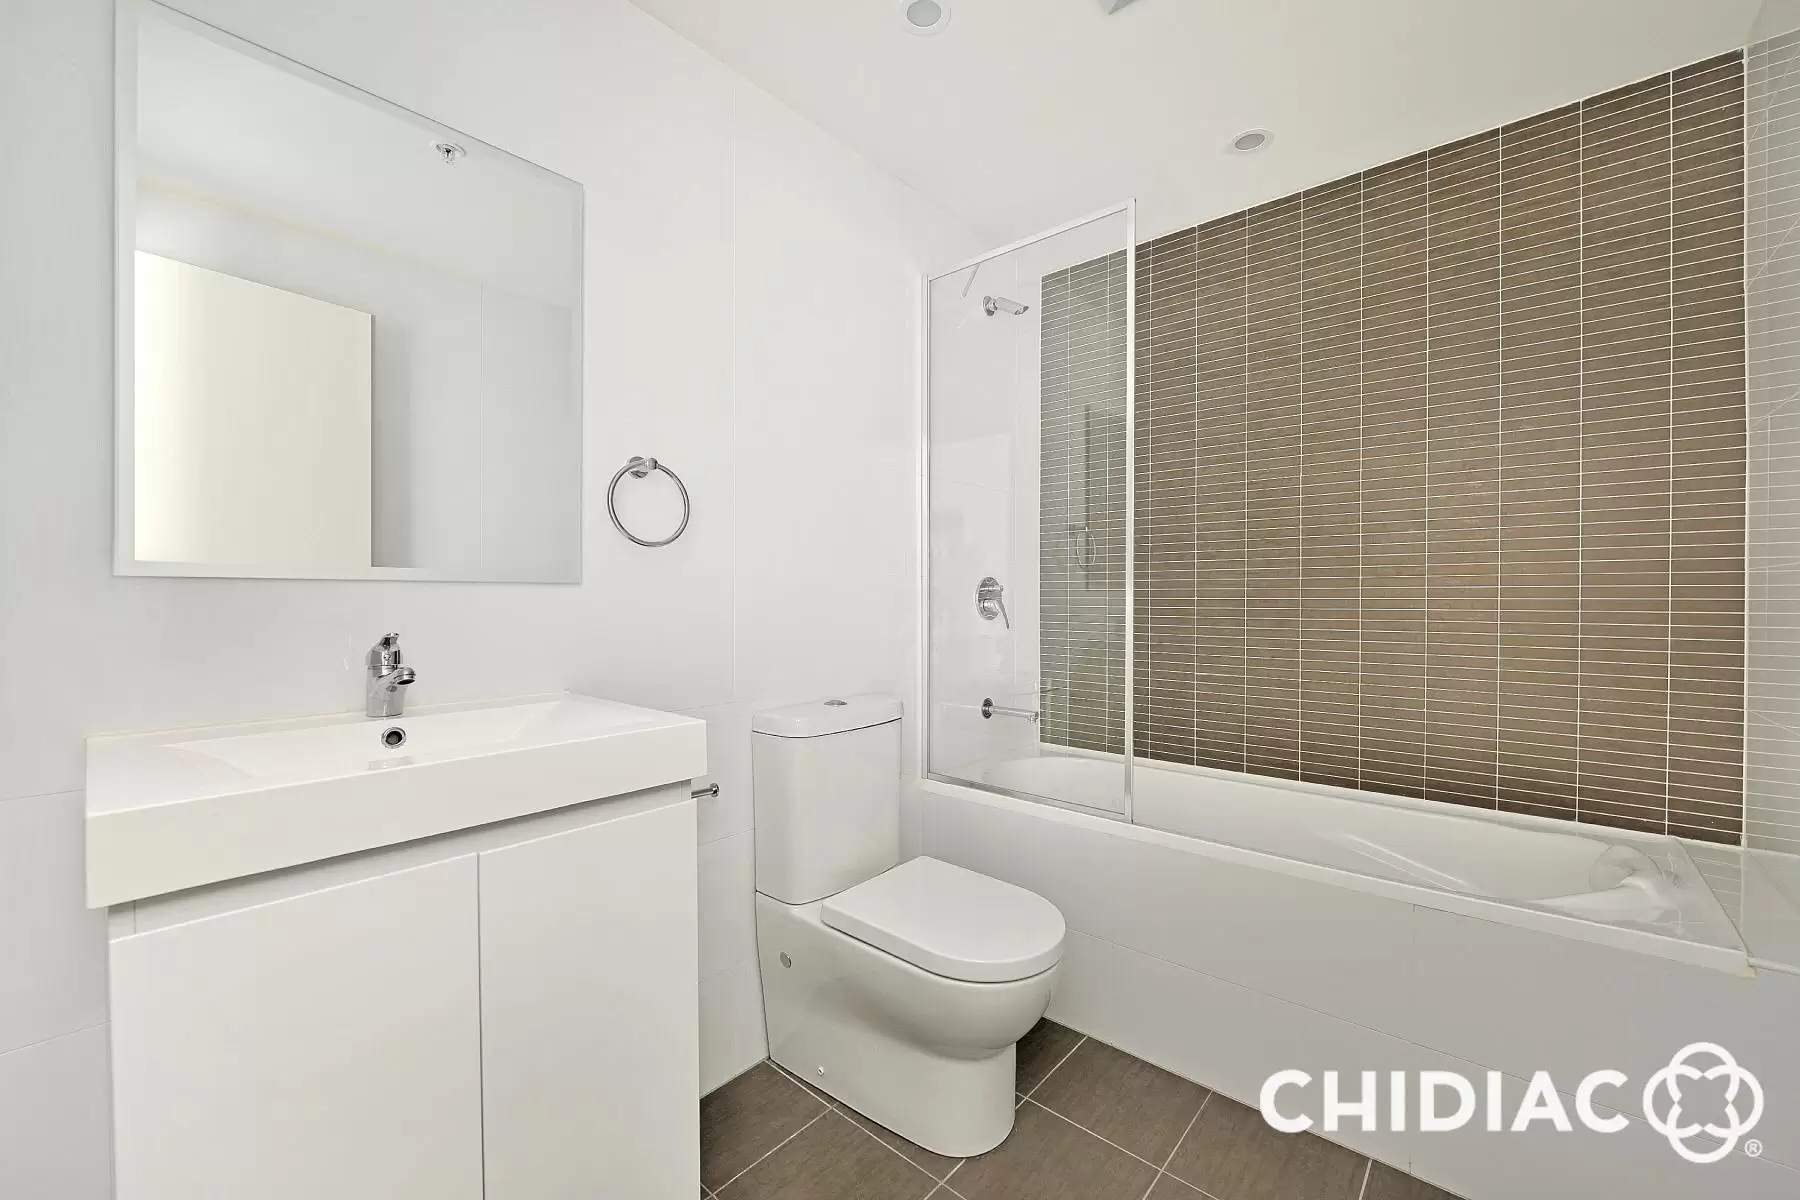 201/6 River Road West, Parramatta Leased by Chidiac Realty - image 5